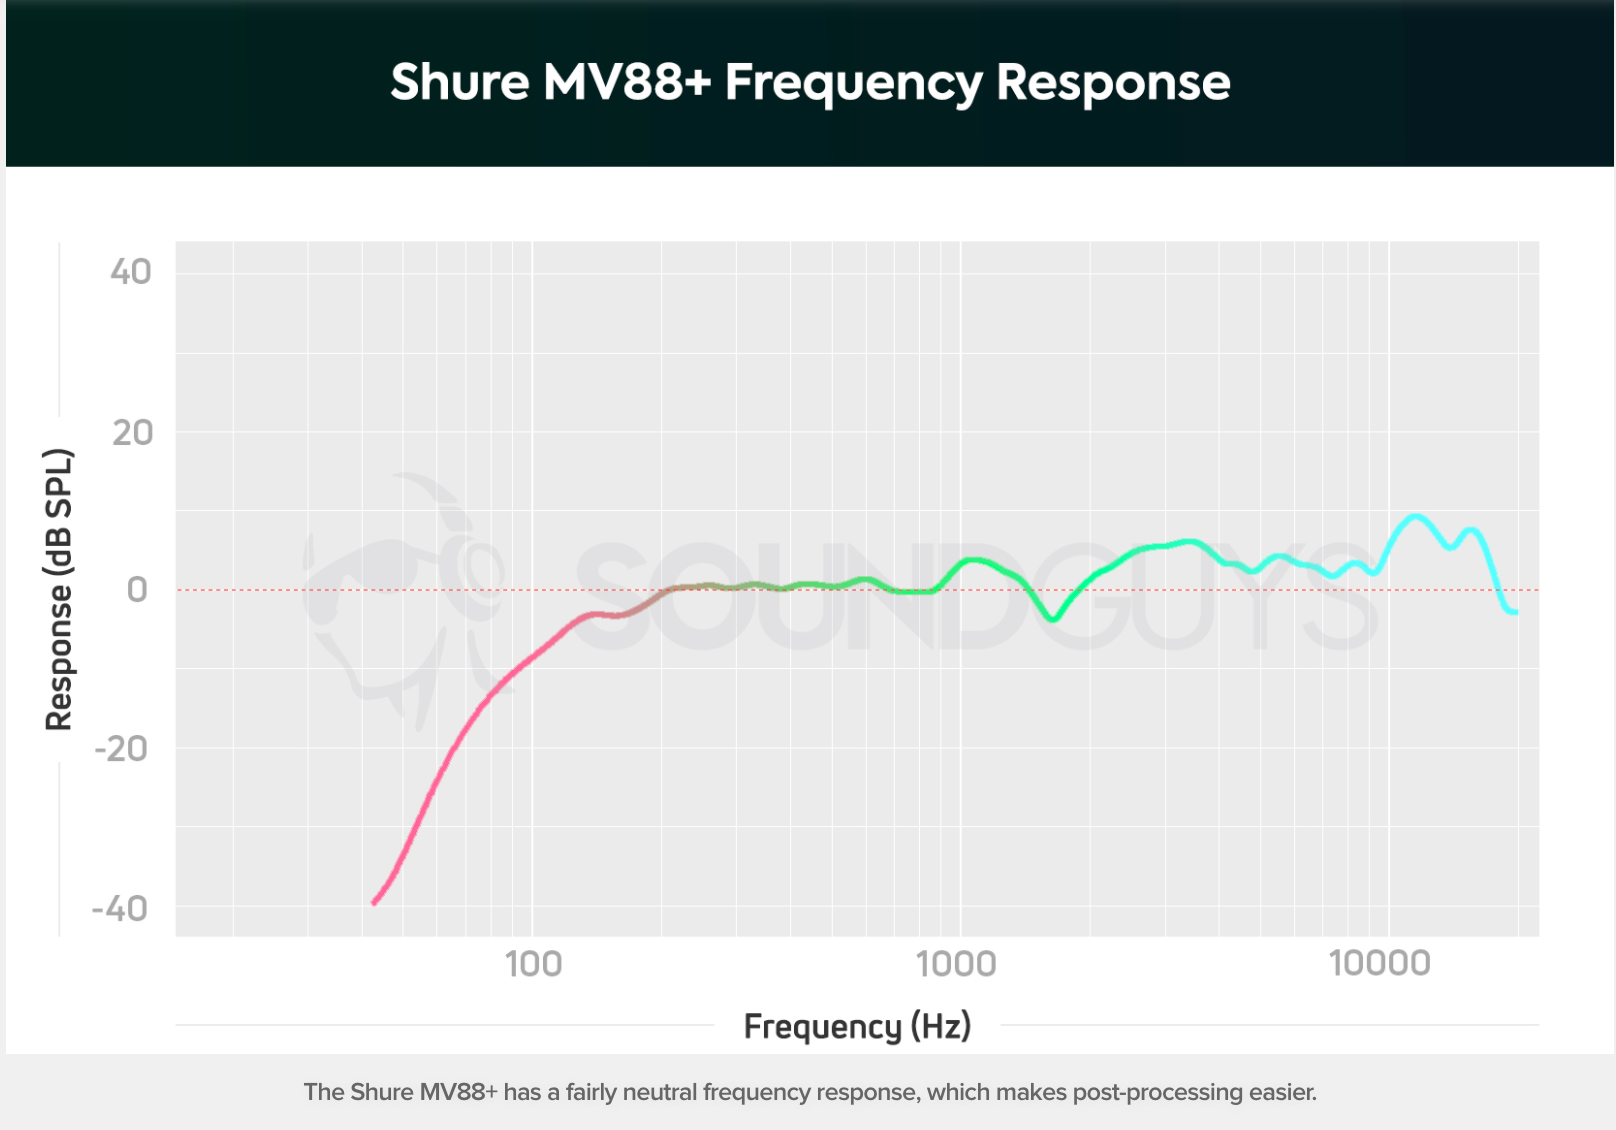 Is the Shure MV88+ Video Kit better than a phone mic?